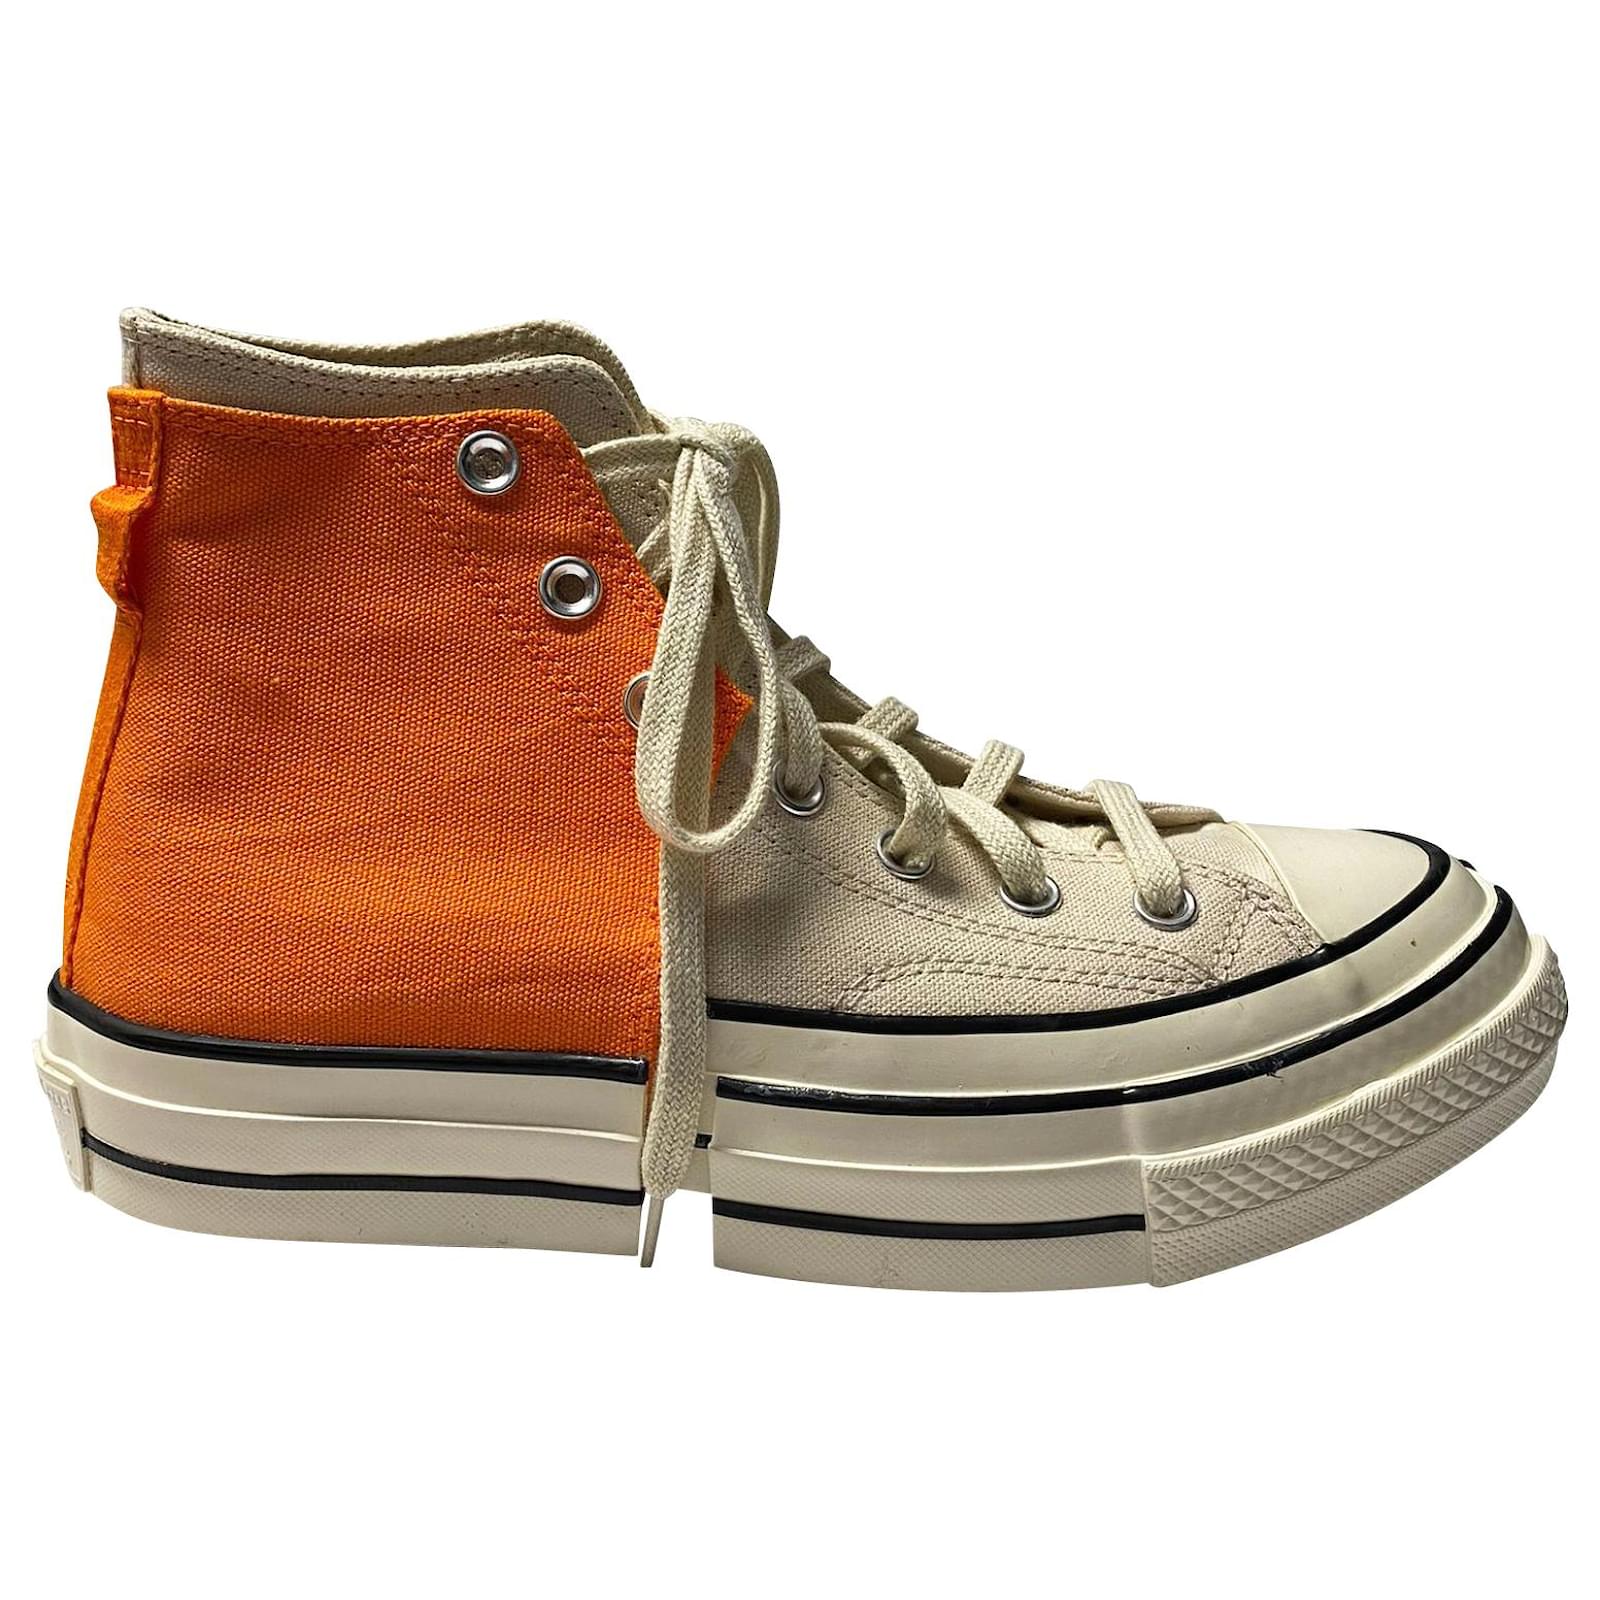 Converse x Feng Chen Wang Chuck 70 Sneakers Alte In Gomma Canvas Avorio  Persimmon مورتال كومبات